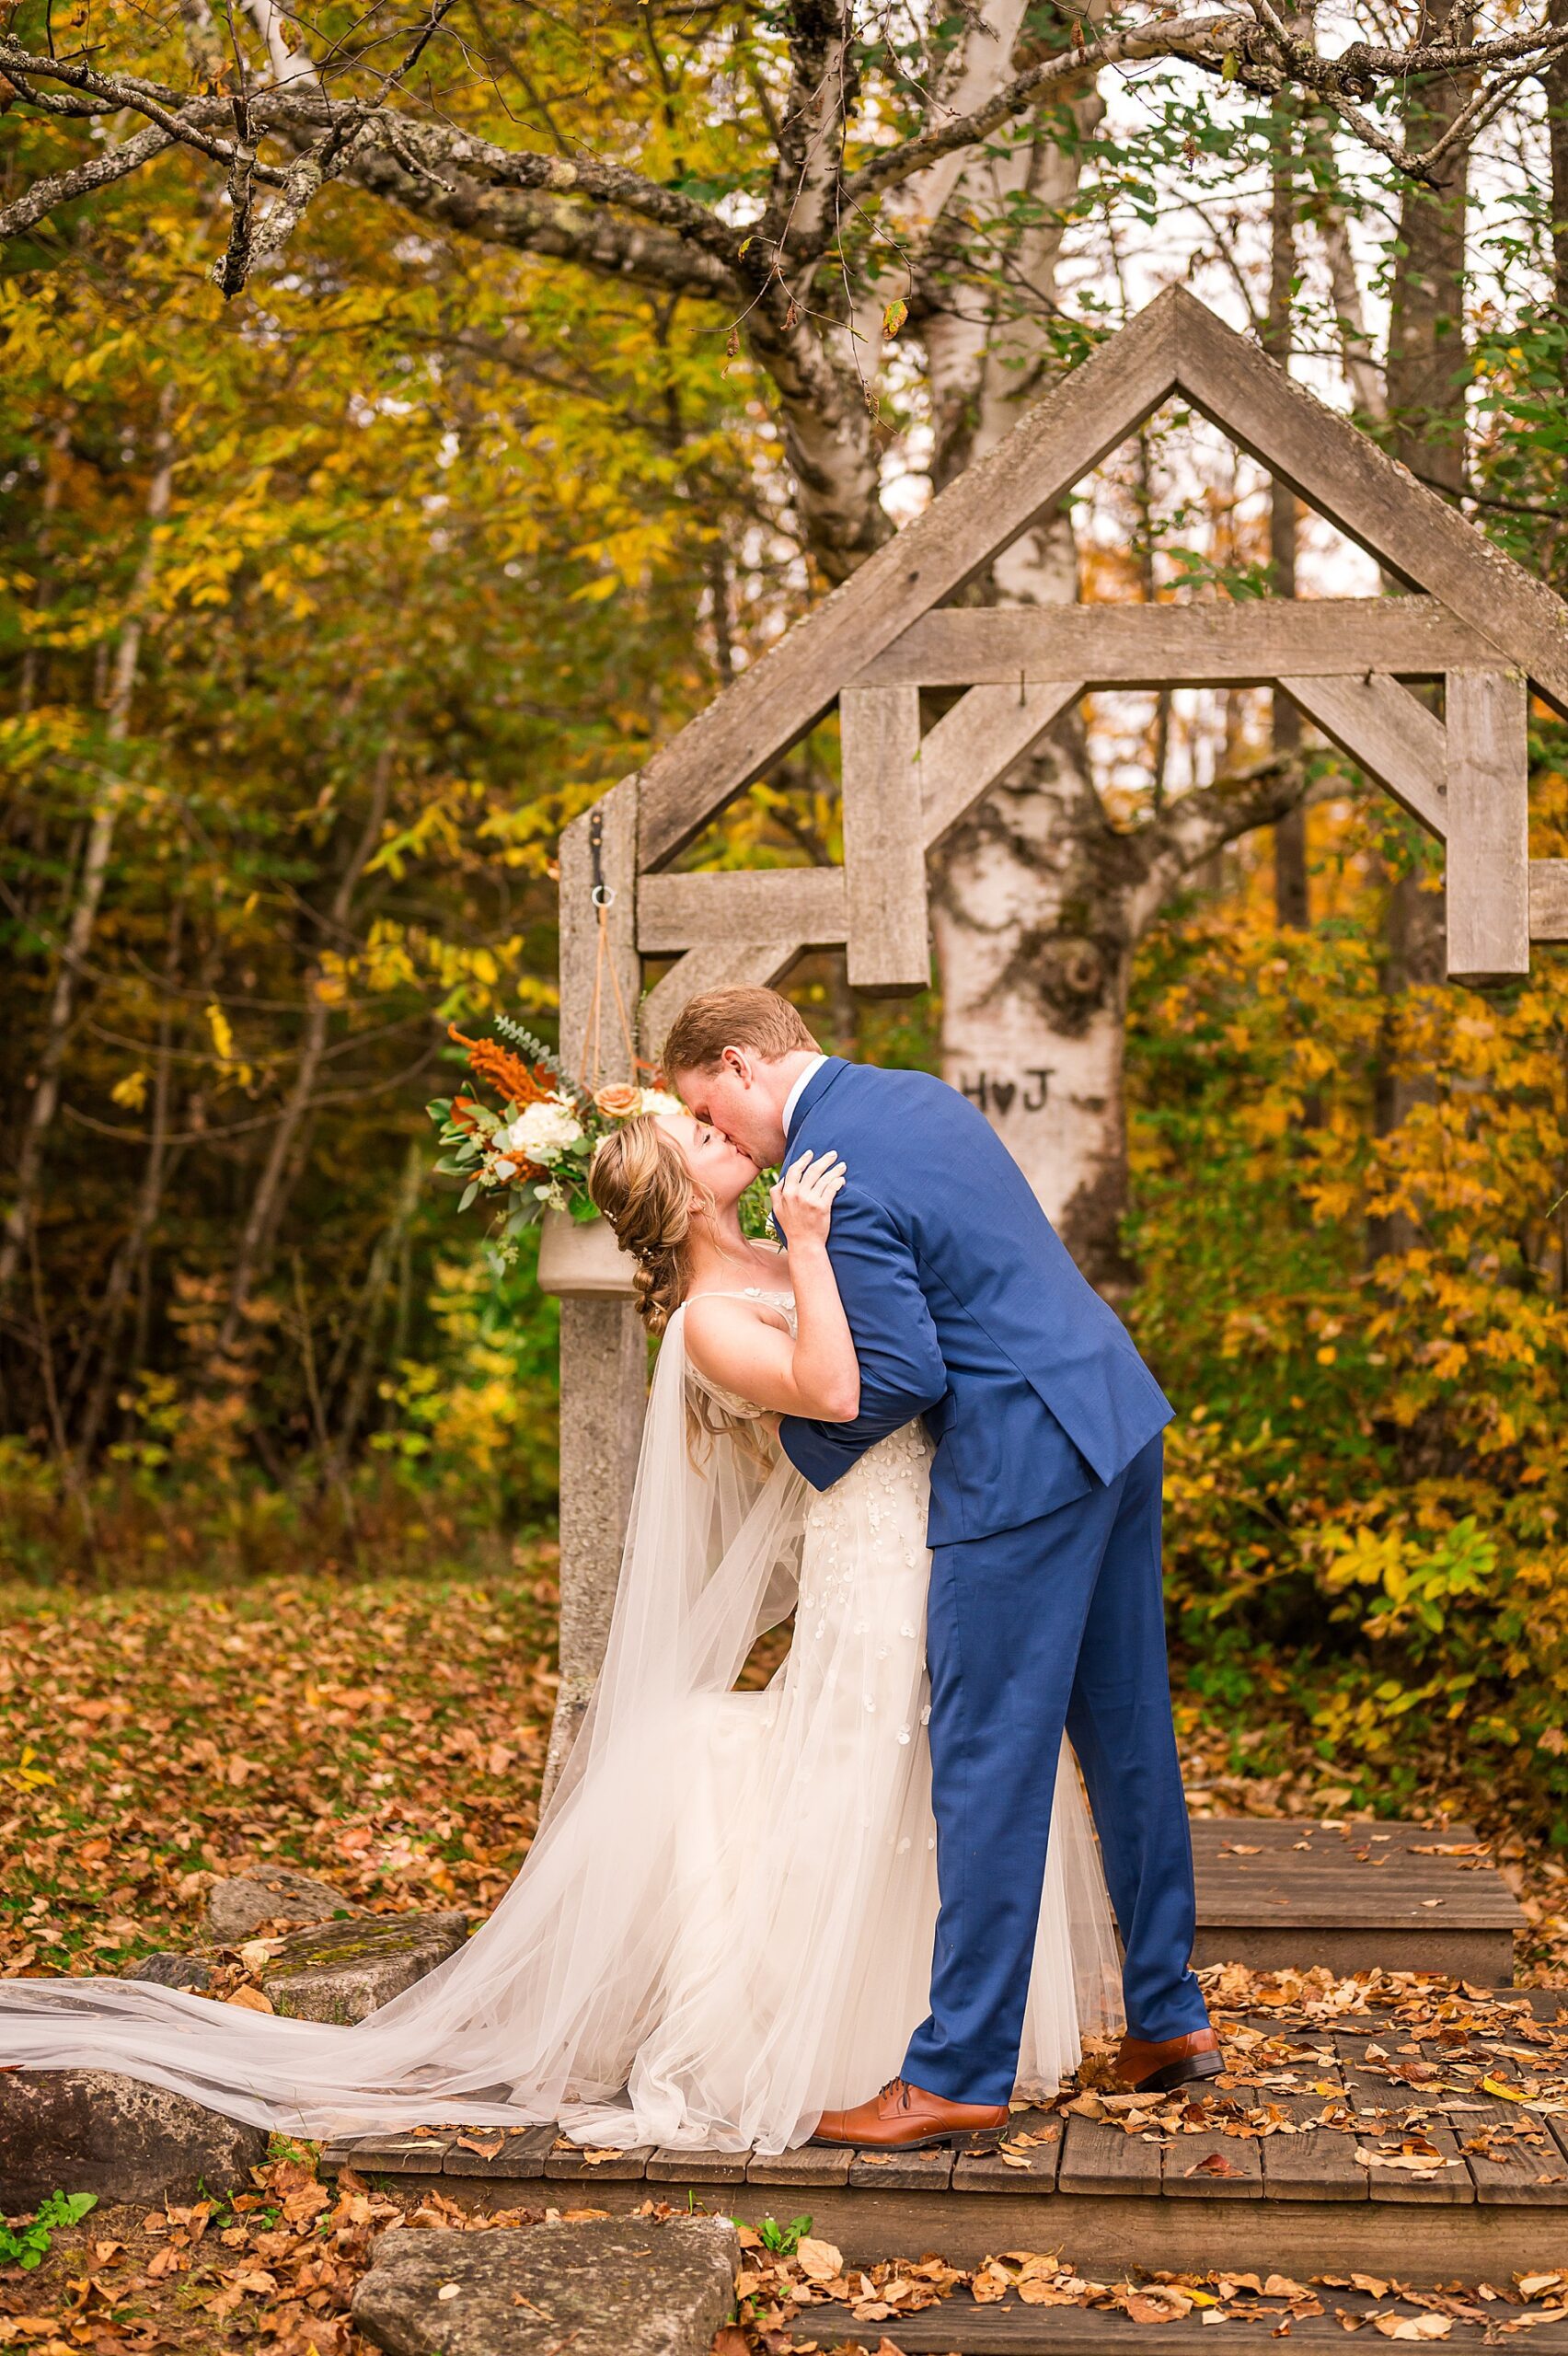 Enchanting Fall Wedding ceremony in Vermont at The Alerin Barn